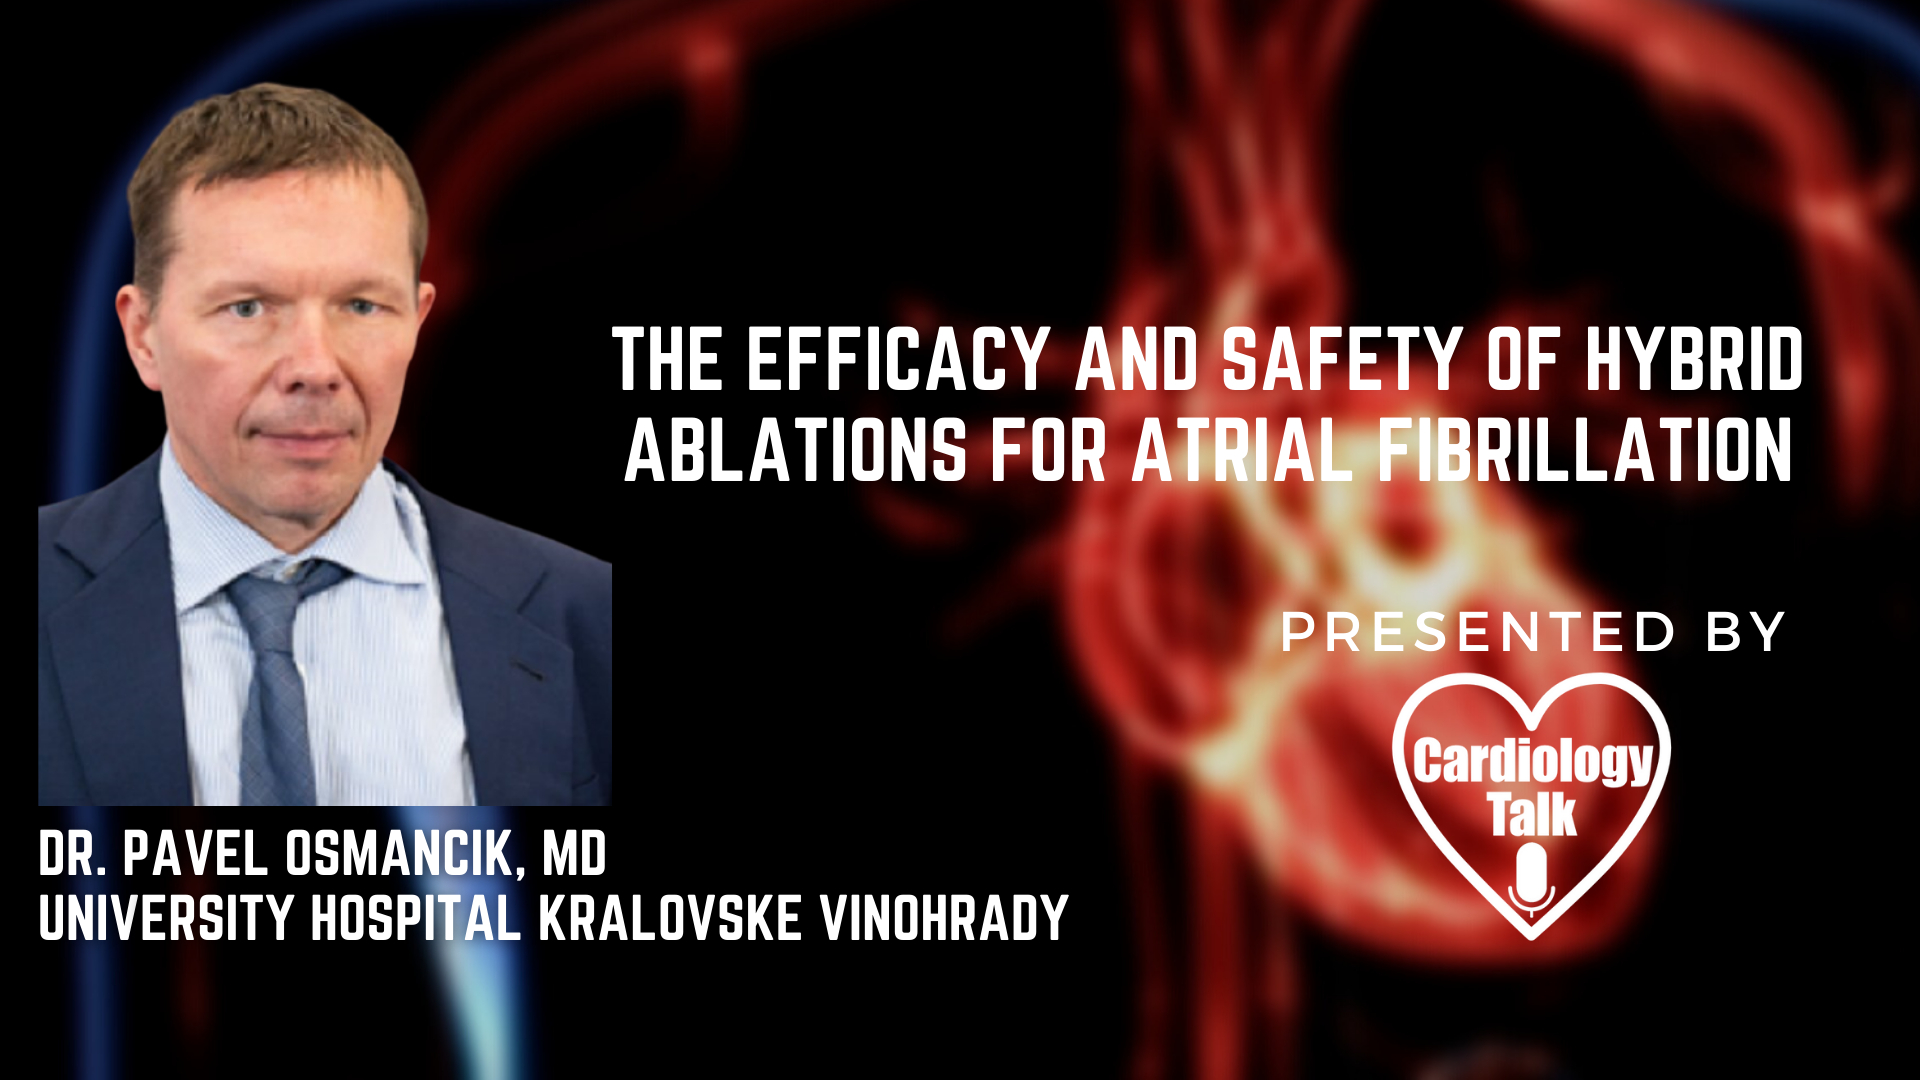 Dr. Pavel Osmancik, MD- The Efficacy and Safety of Hybrid Ablations for Atrial Fibrillation   @PavelOsmancik  #AtrialFibrillation #Cardiology #research